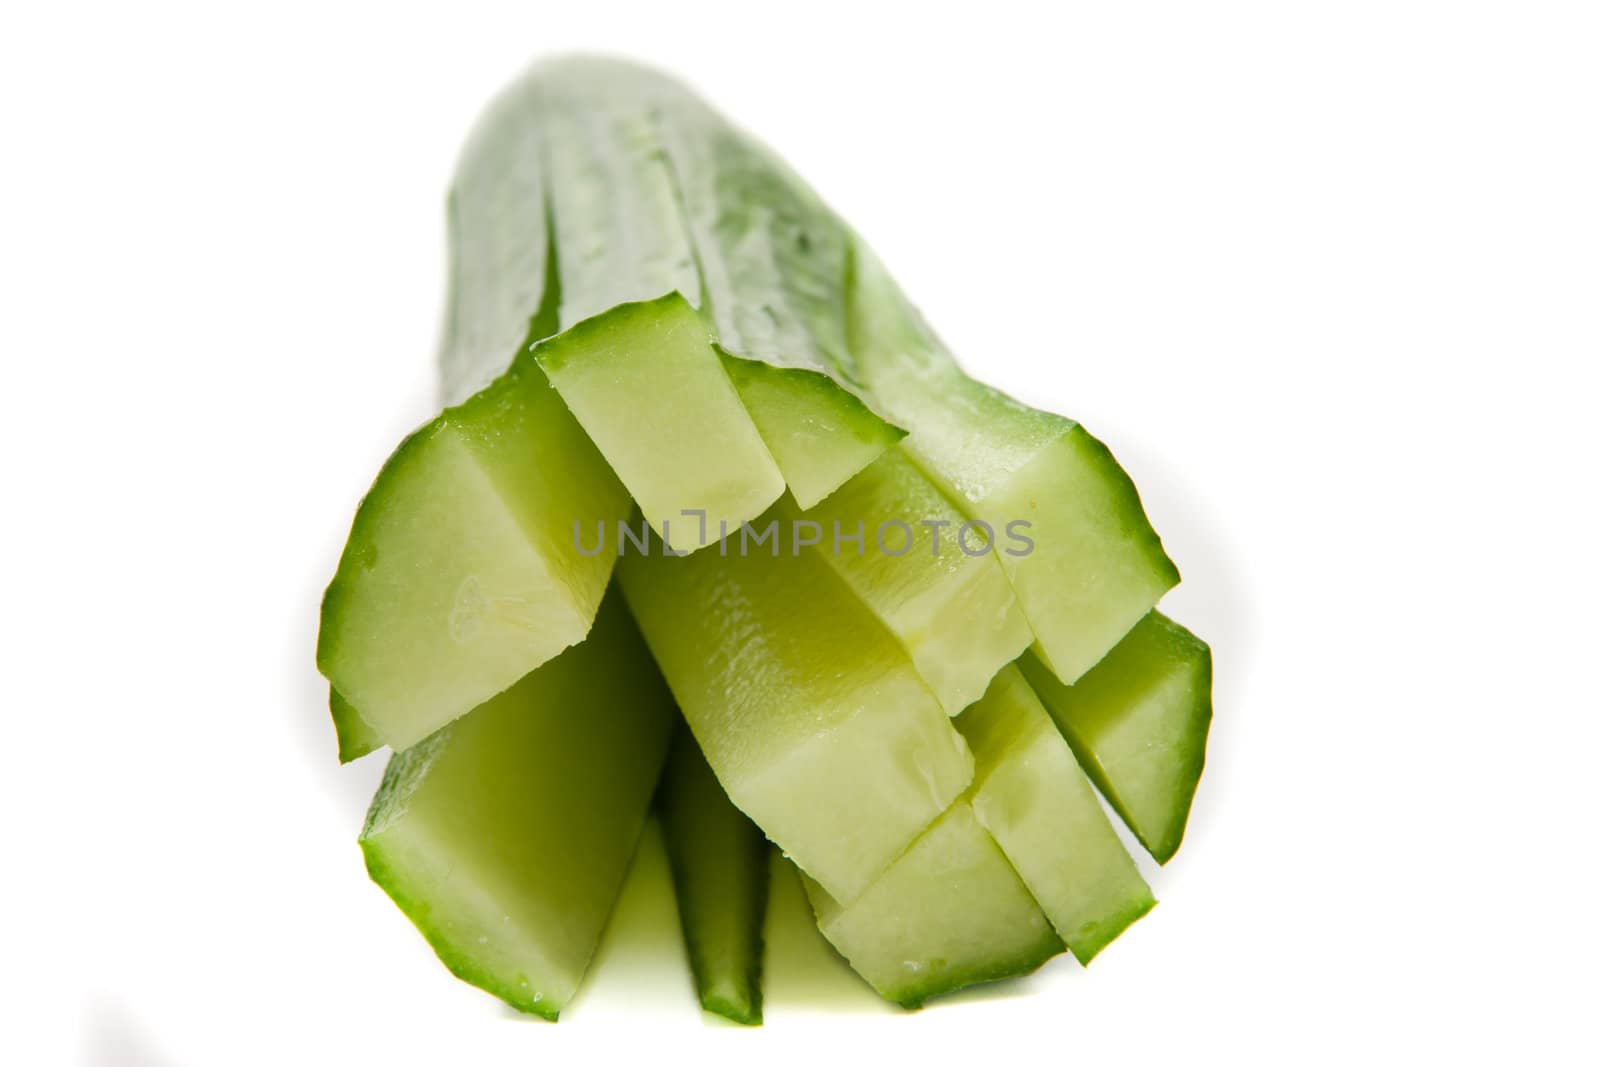 Chopped up cucumber by Stootsy